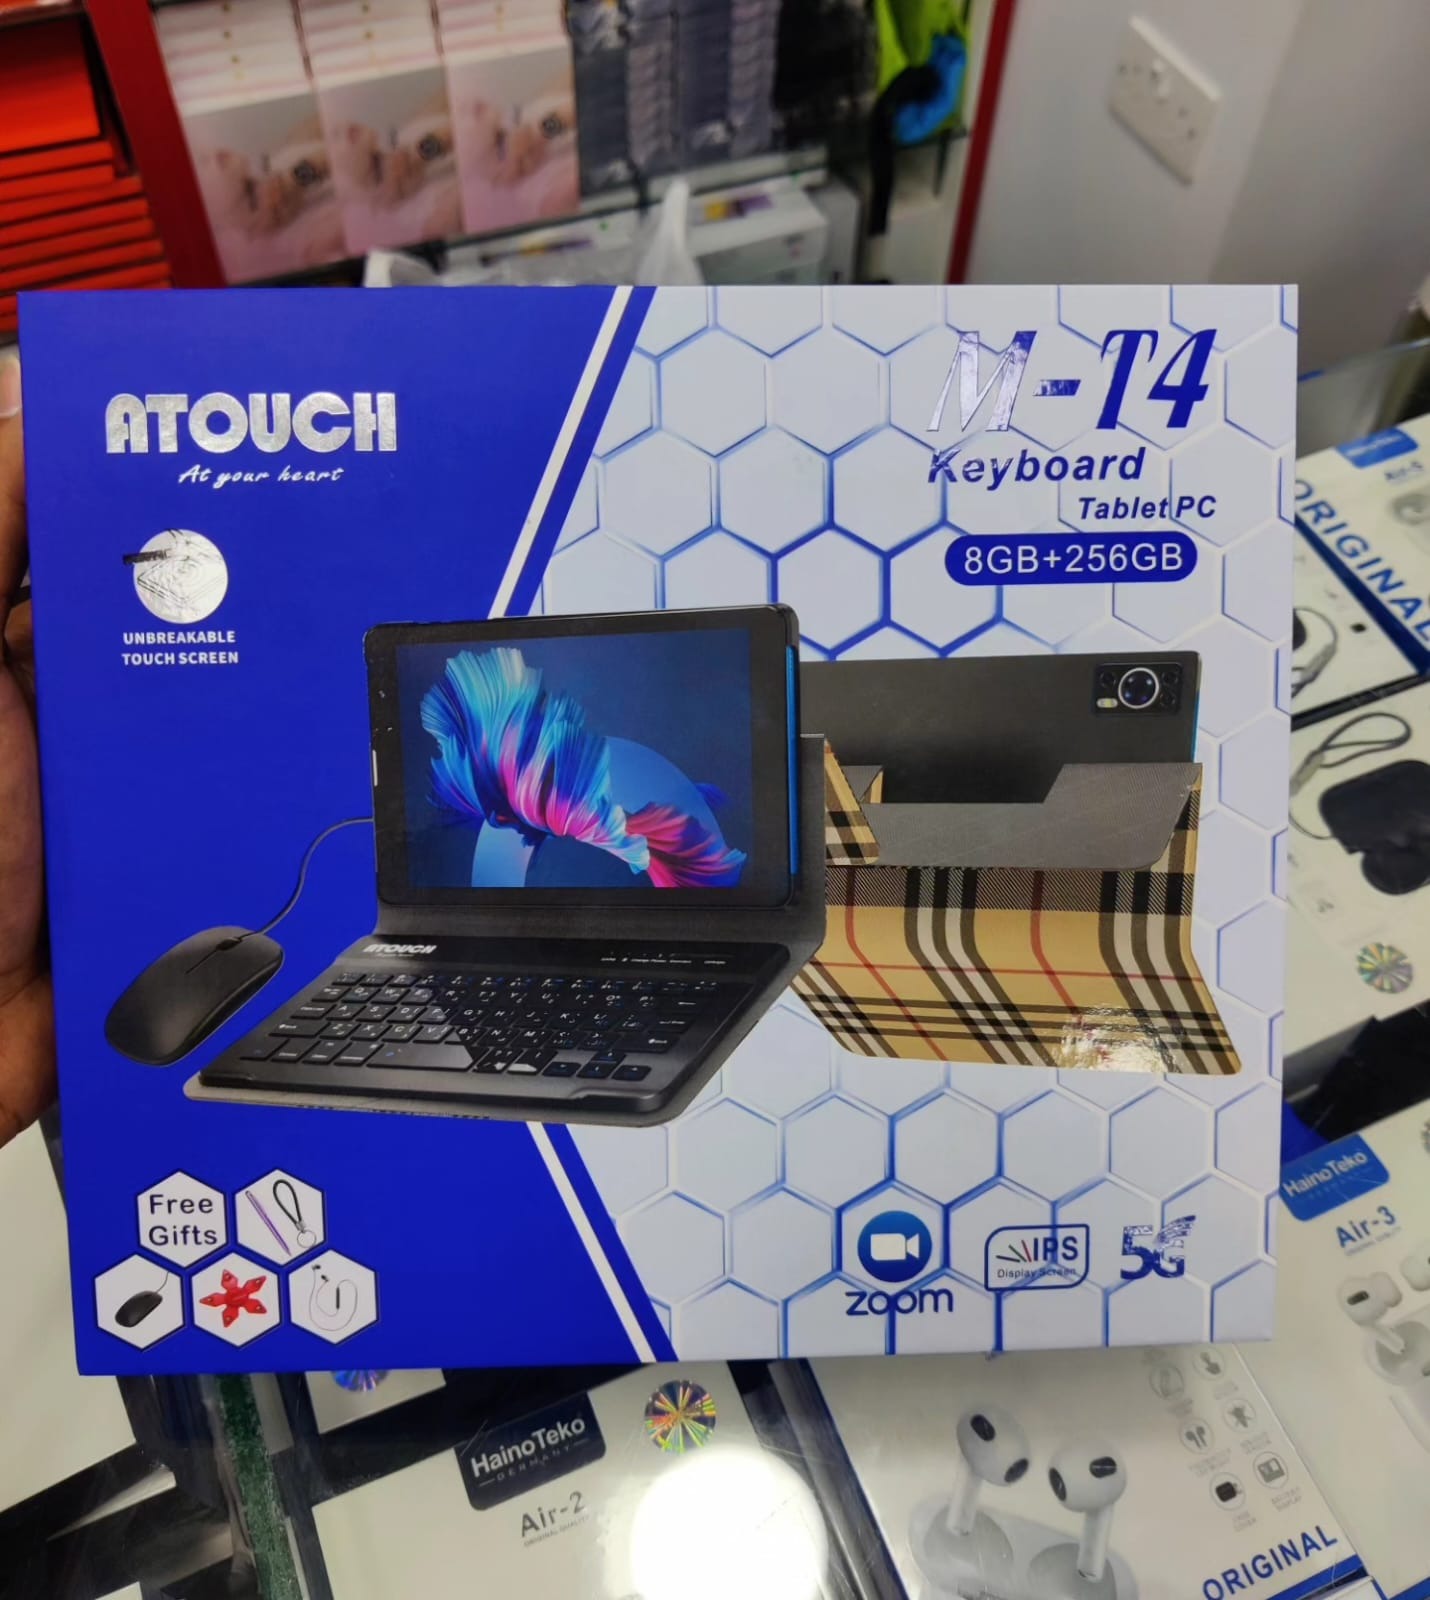 Atouch 8" Smart Keyboard Tablet PC M-T4 8GB/256GB (FREE GIFTS)